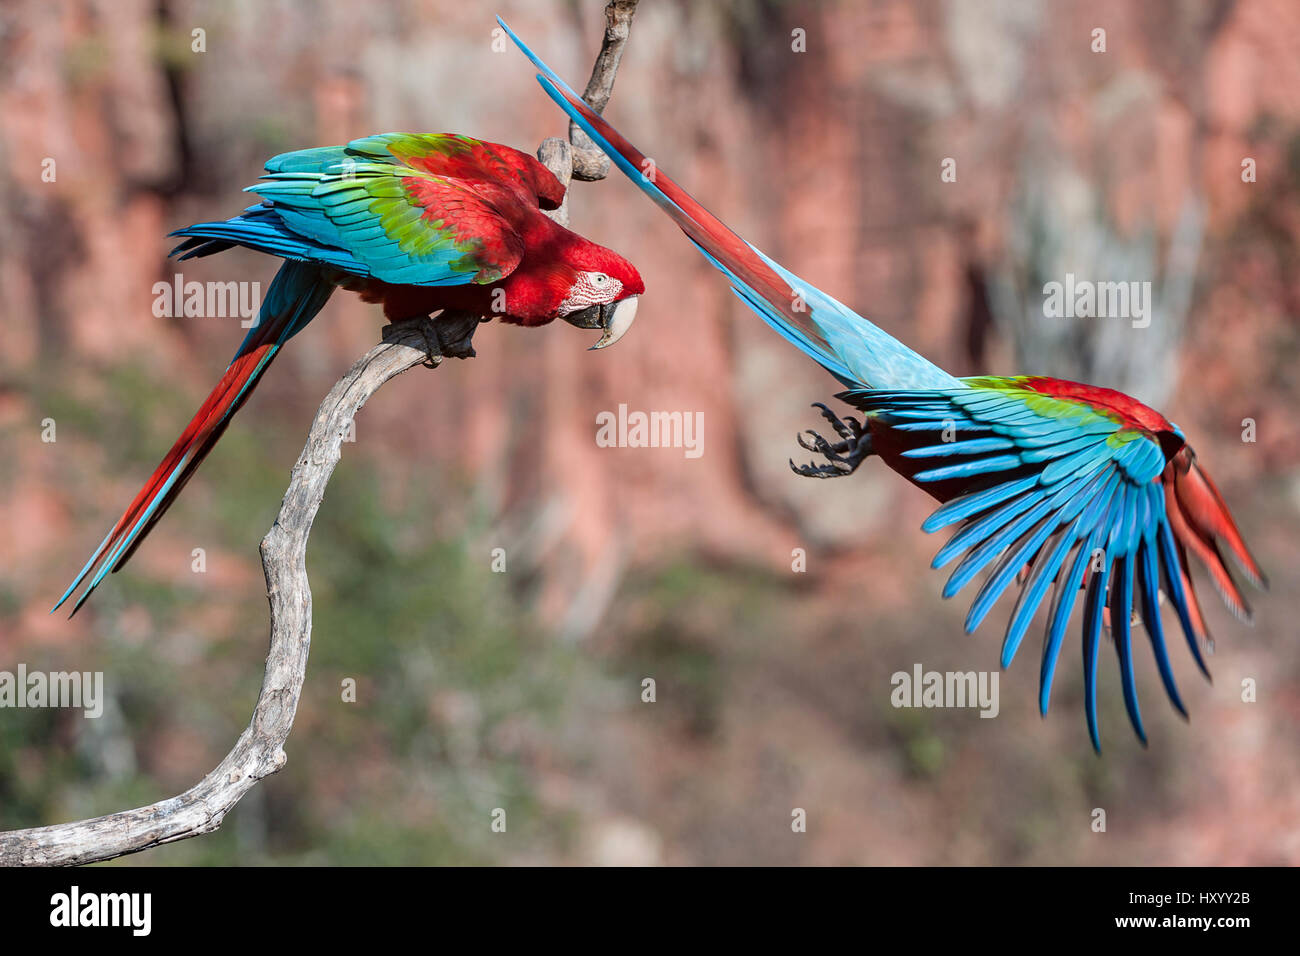 Red-and-green macaws  (Ara chloropterus) two with one taking off, Buraco das Araras (Sinkhole of the Macaws), Jardim, Mato Grosso do Sul, Brazil. September. Stock Photo